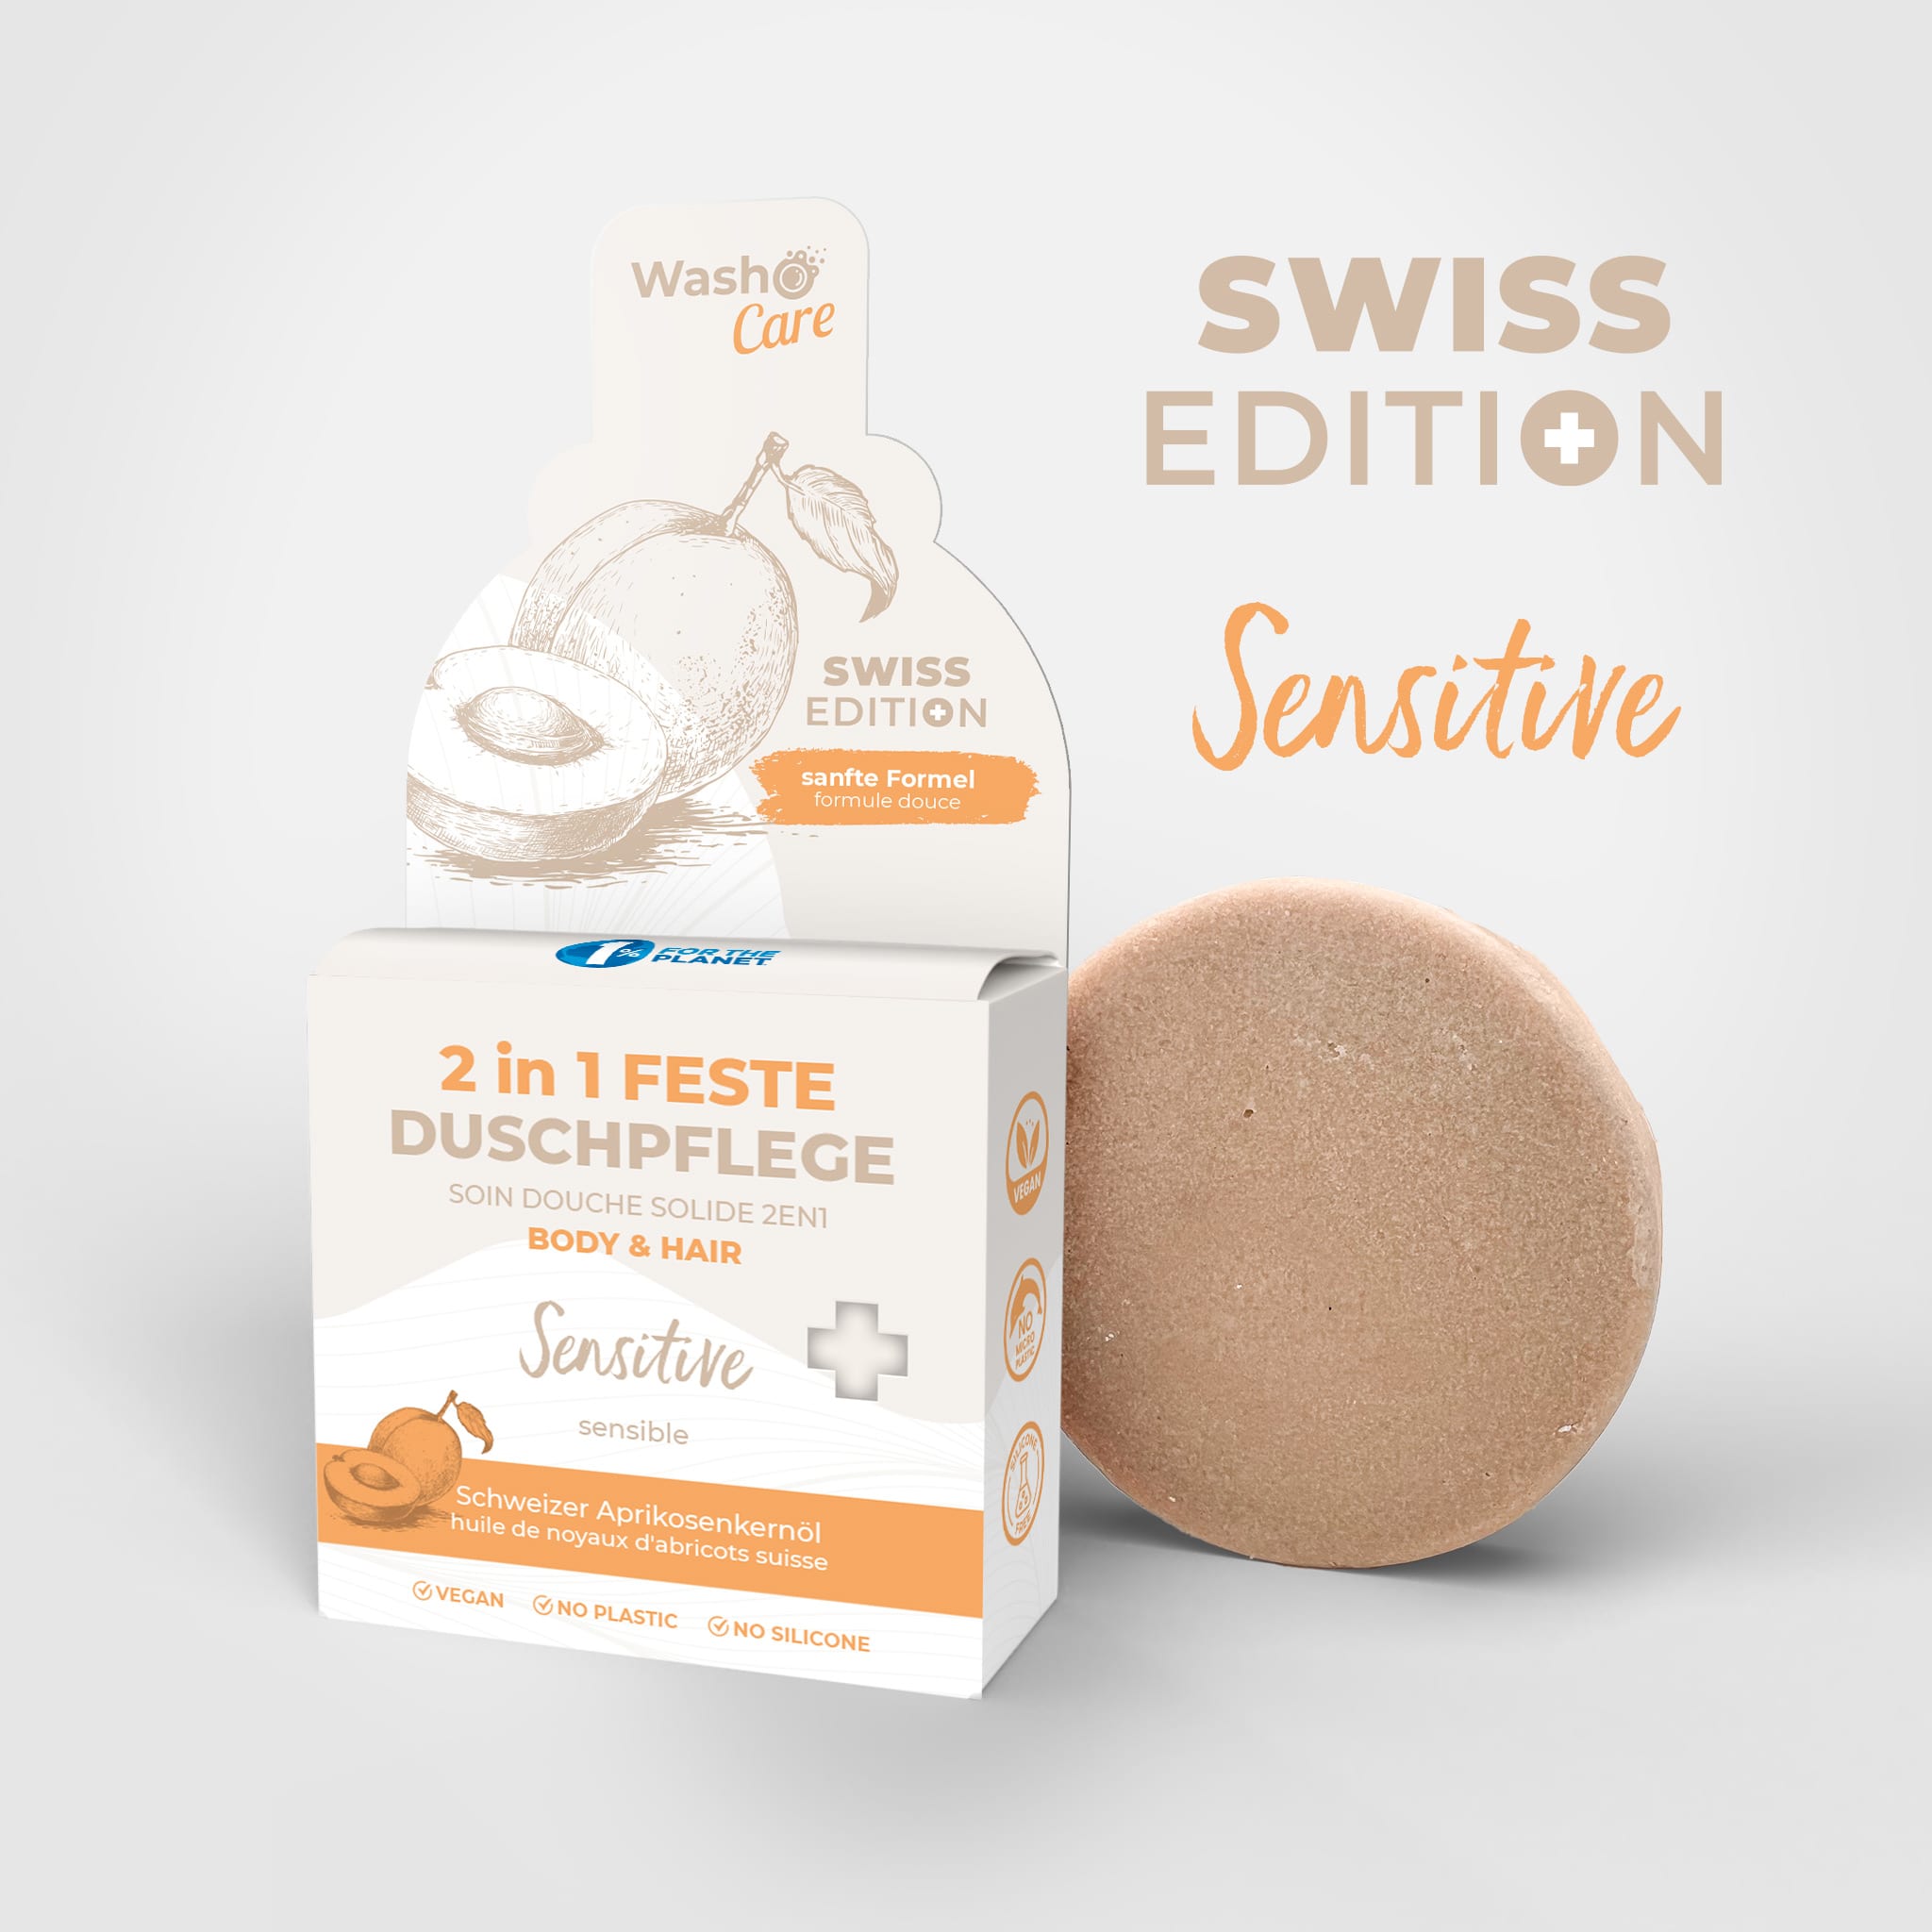 Washo Care Swiss Edition 2in1 Body & Hair Sensitive